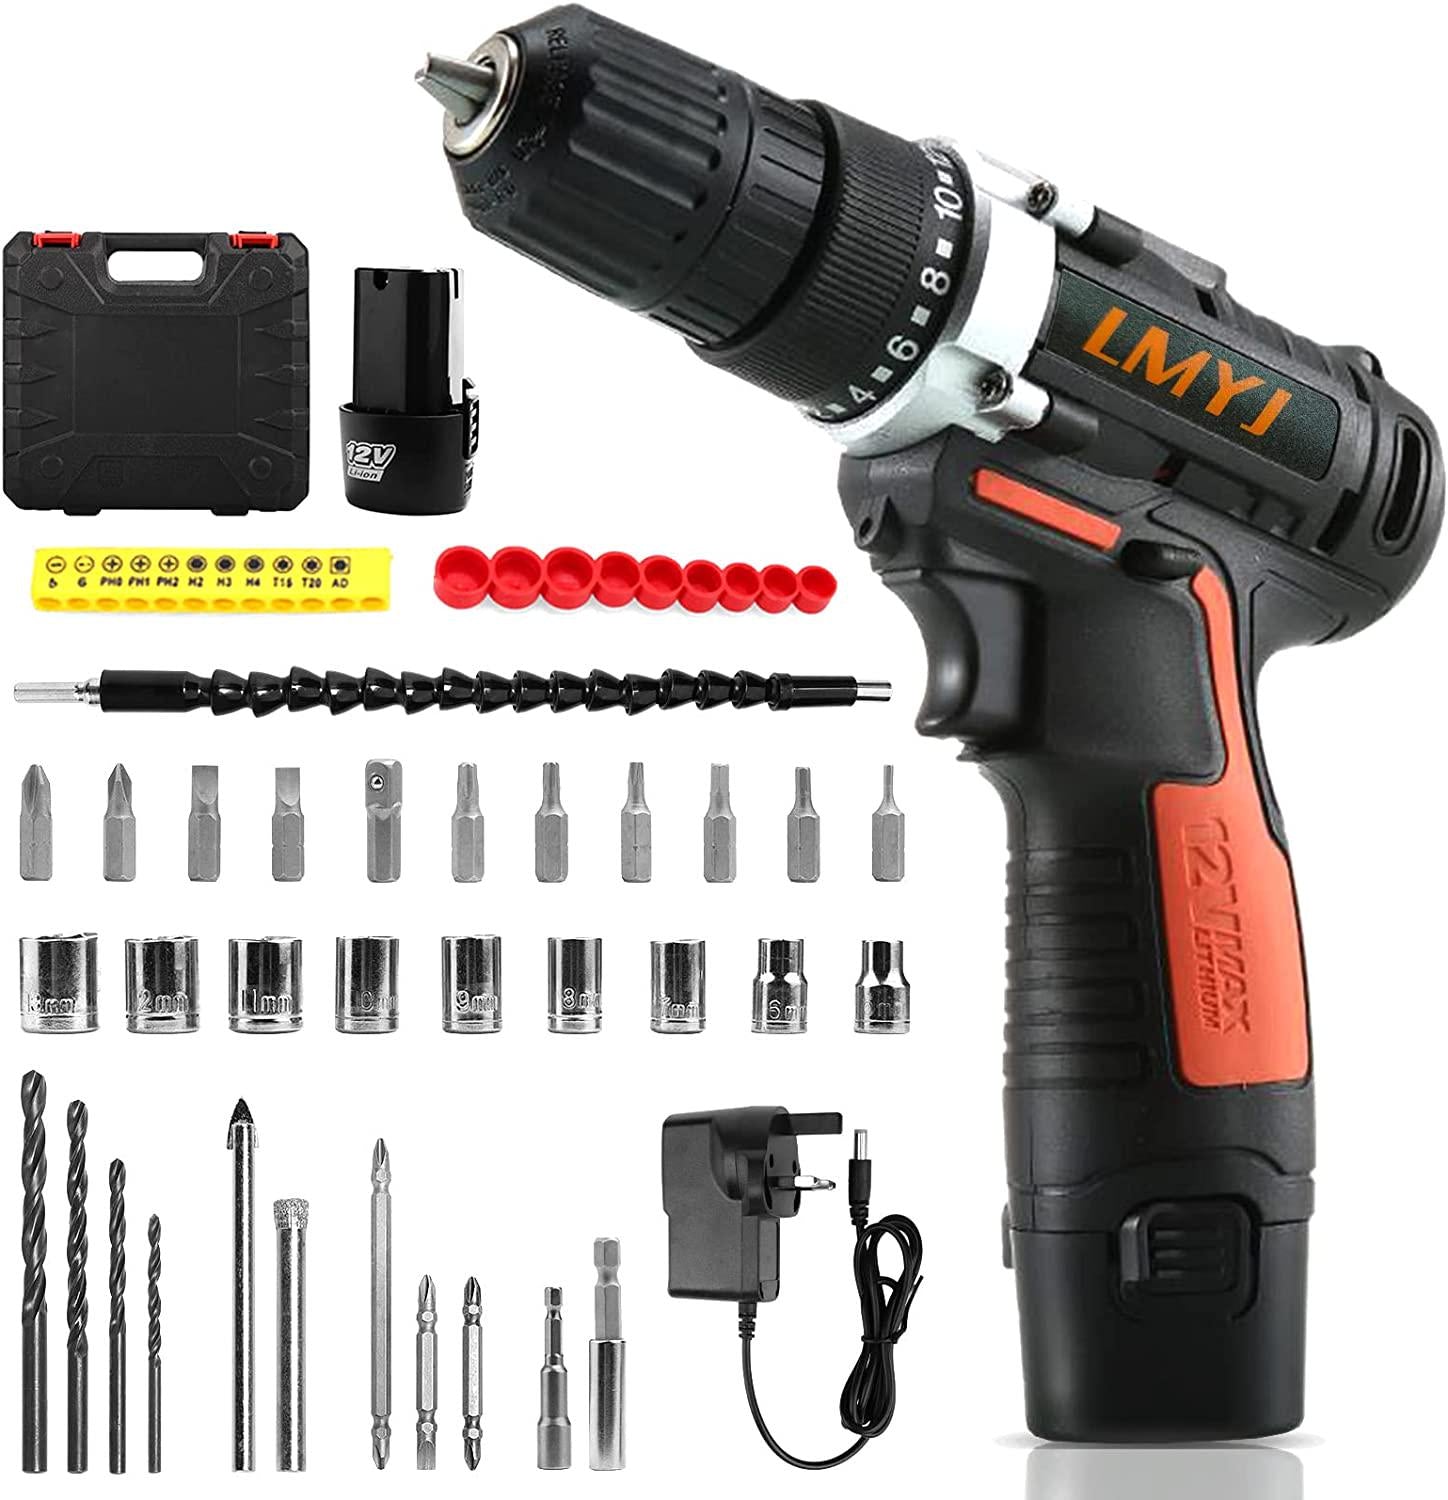 LMYJ, LMYJ Electric Screw Driver, 12V Cordless Drill Driver Kit Combi Drill, 37PCS Multifunctional Rechargeable Power Screwdrivers Tool Starter Set with 1500mAh Li-ion for Home DIY